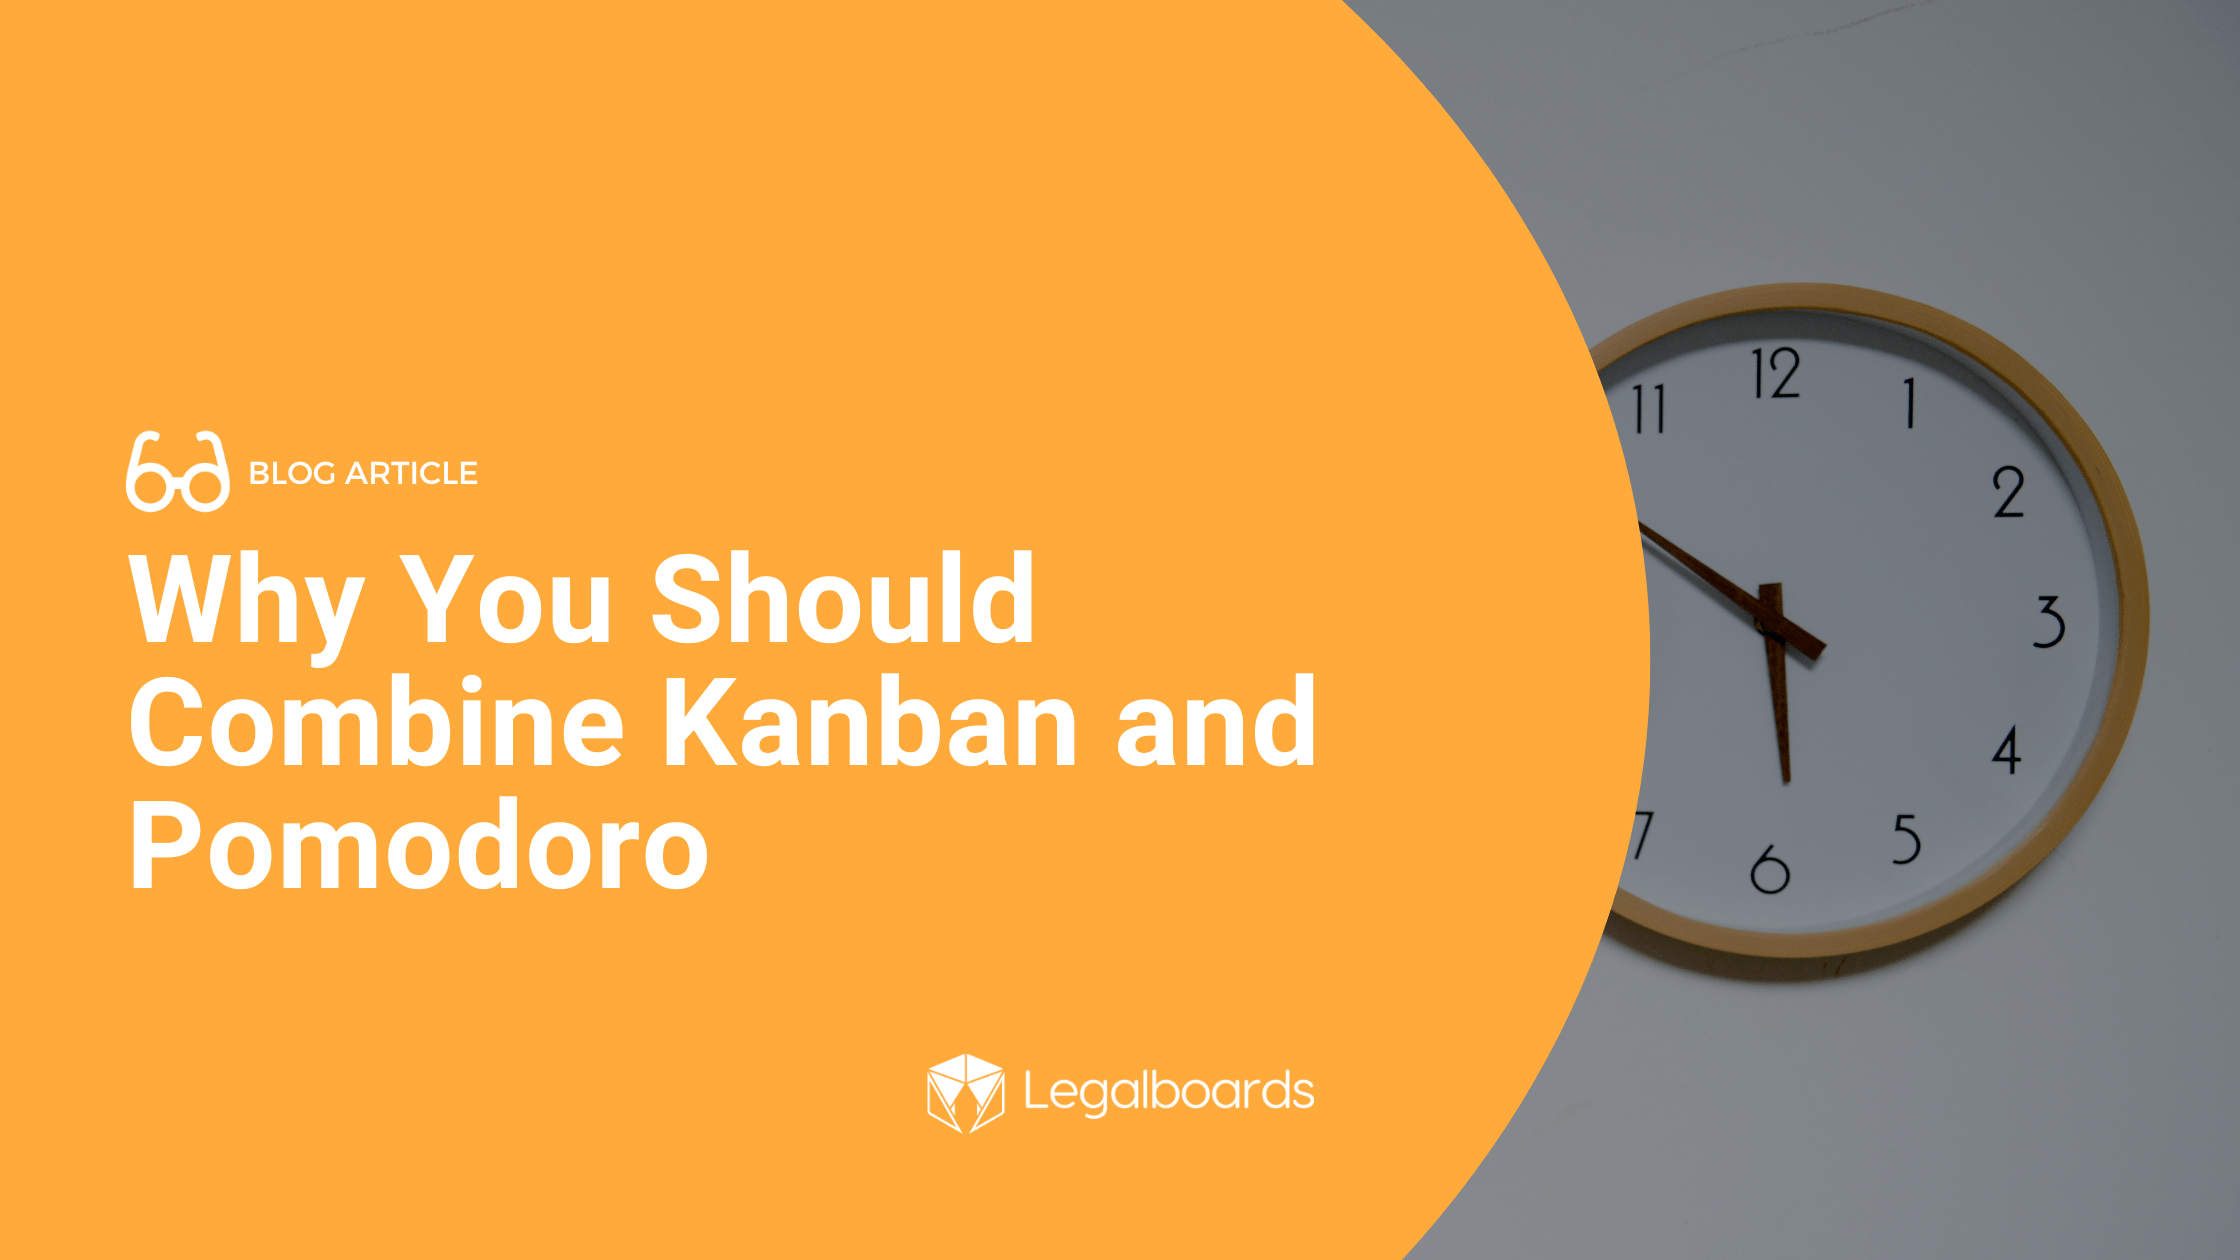 Why You Should Combine Kanban and Pomodoro